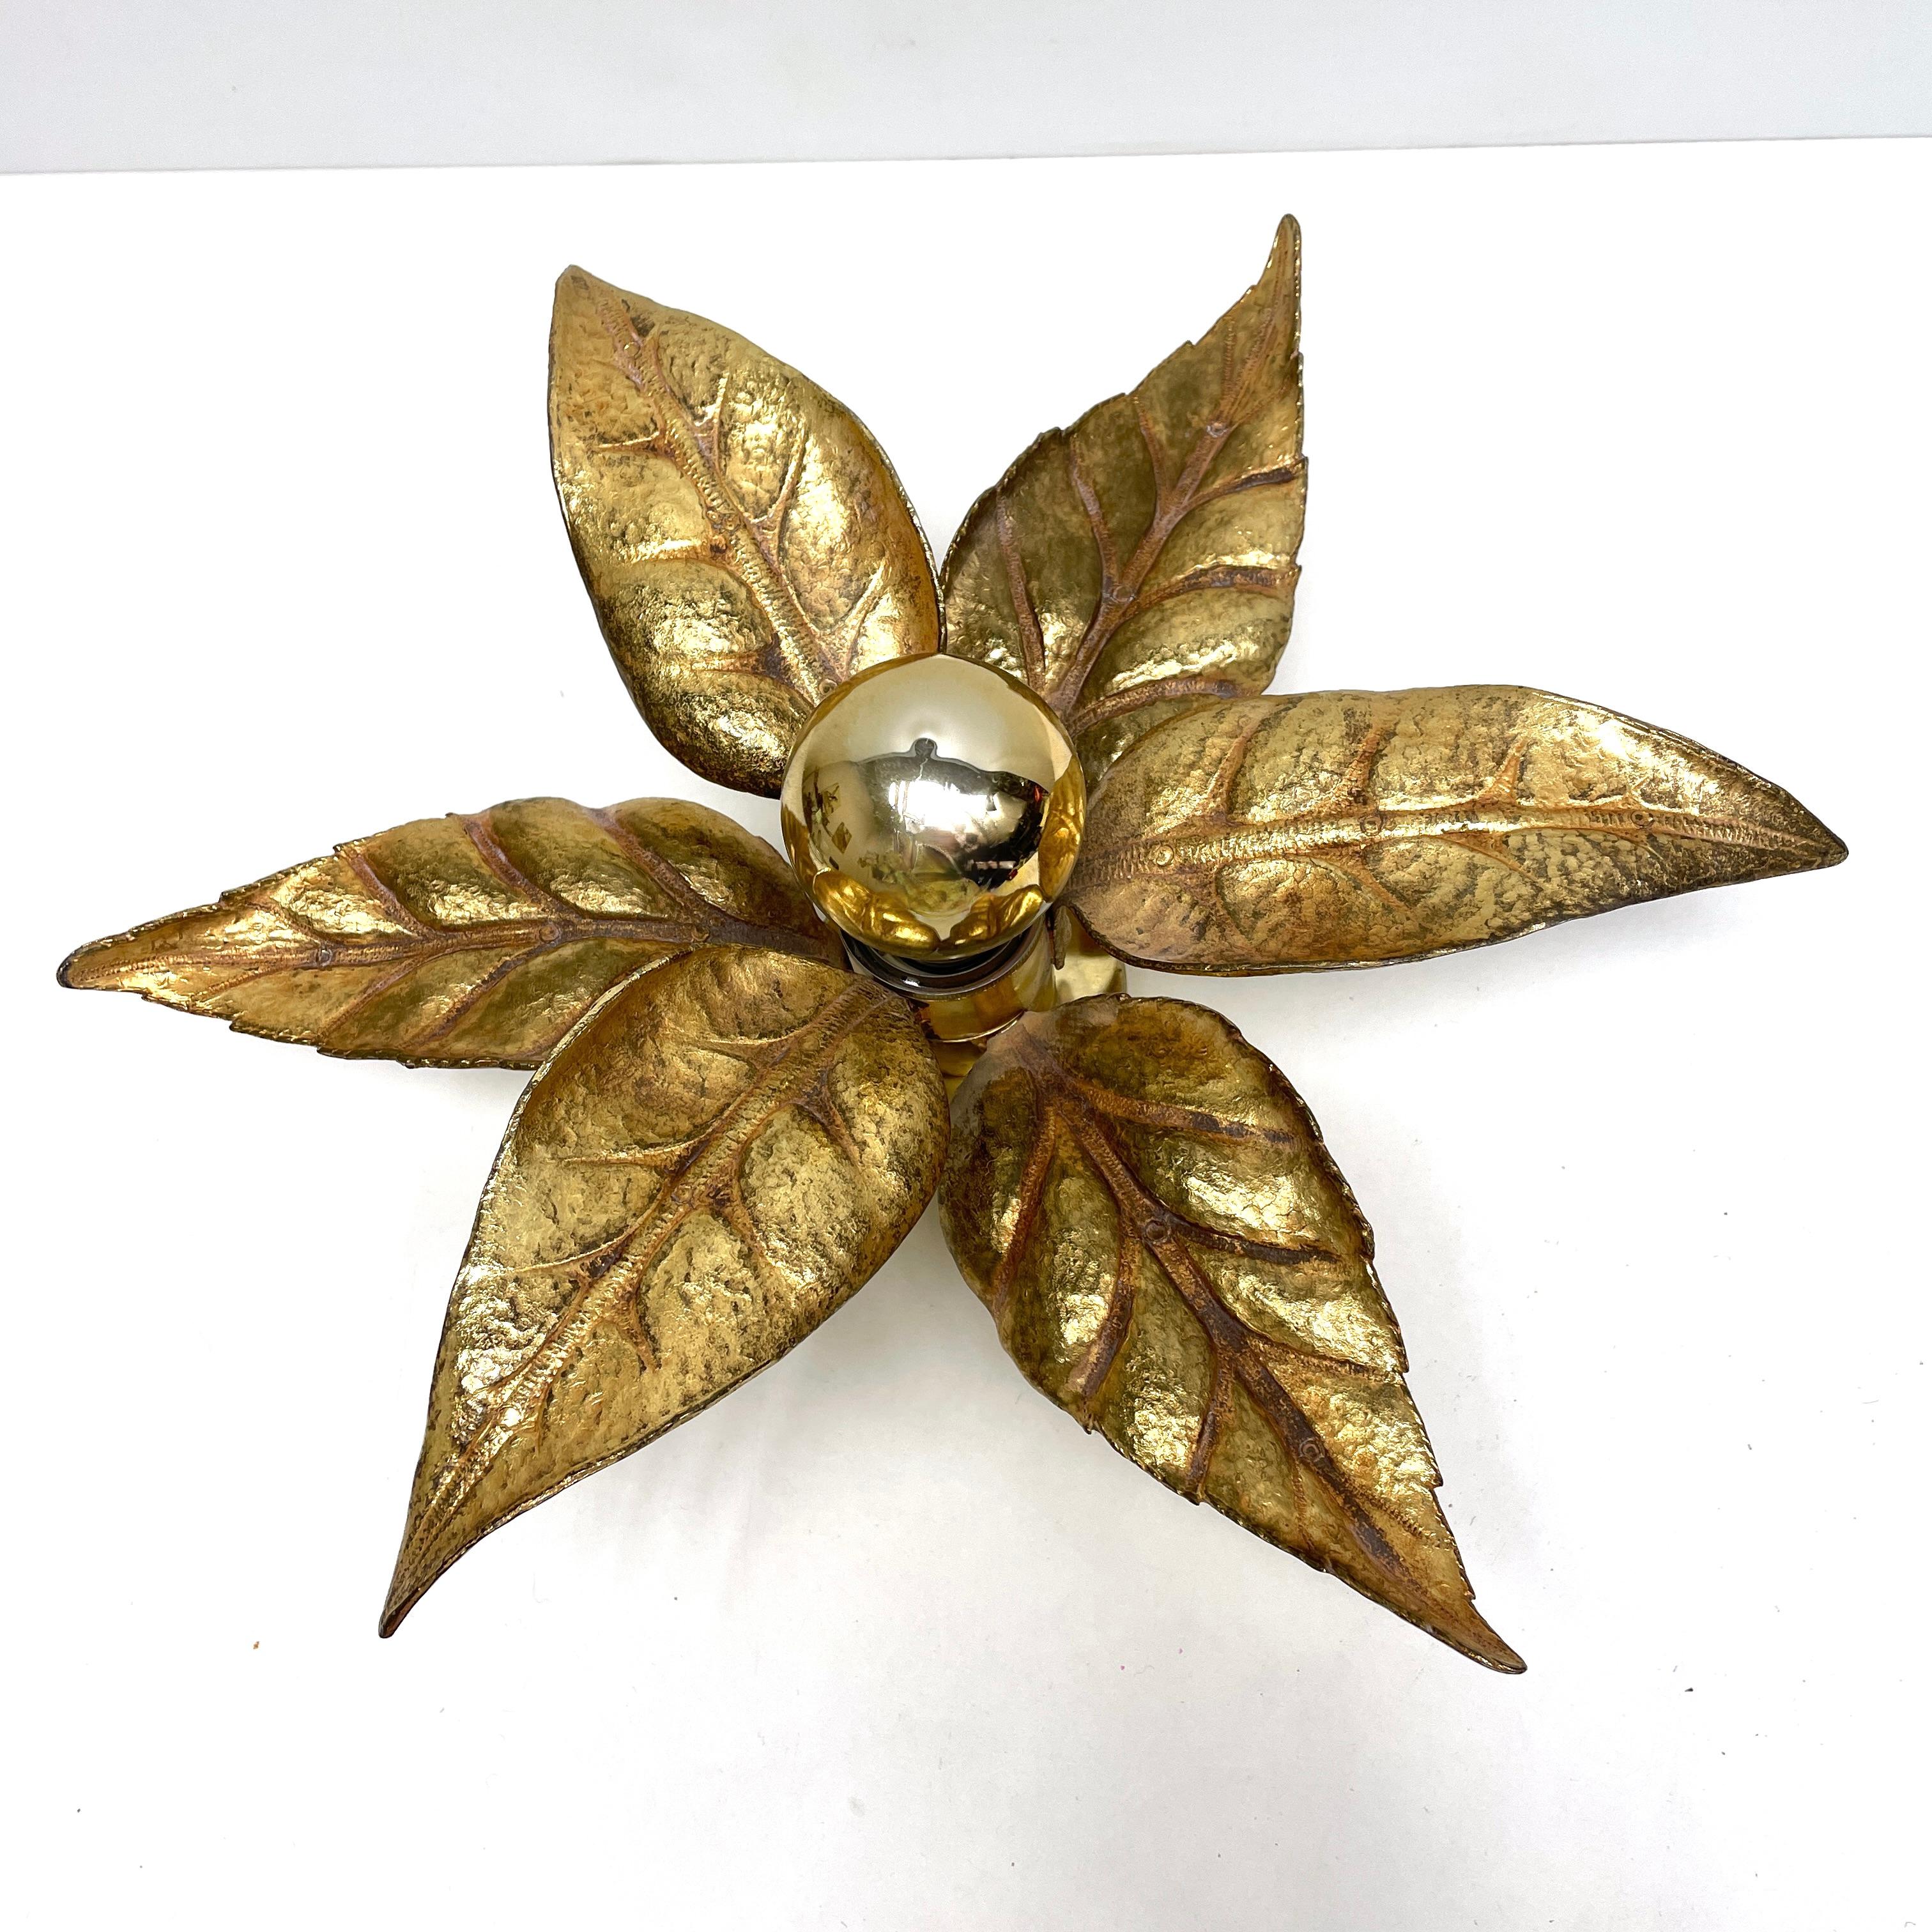 Elegant Willy Daro flower light for ‘Massive Lighting', 1970s. Cast brass flower wall or ceiling light, the light attaches by a plate so can be used either way. The light is wired and in full working order, but as with all our lighting we would